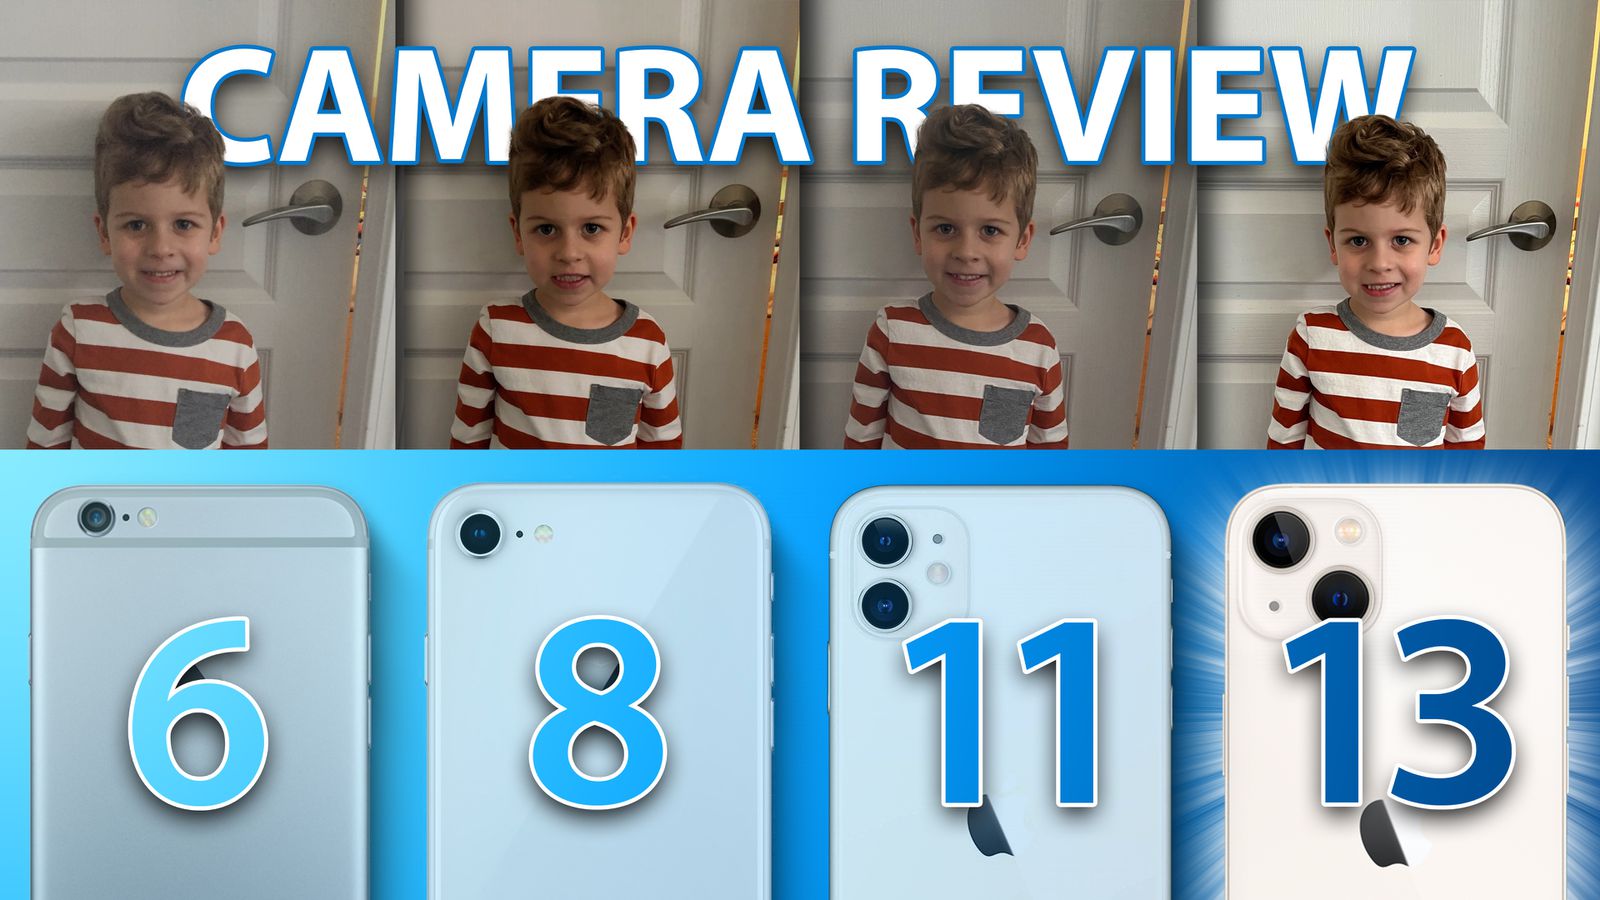 Is the new iPhone 13 camera better?